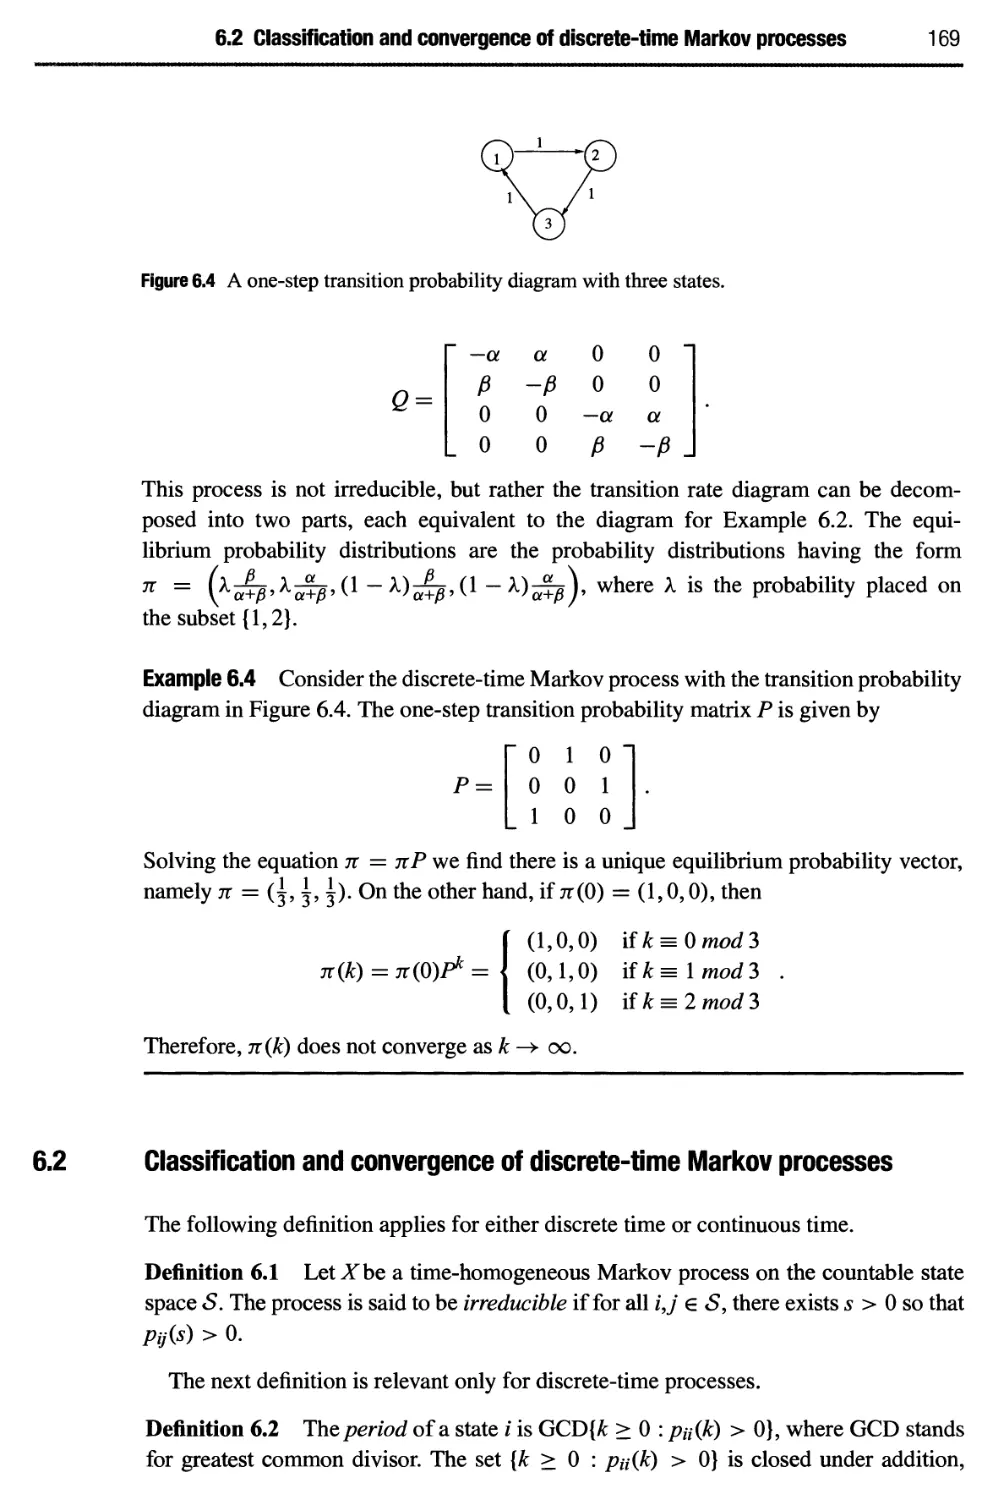 6.2 Classification and convergence of discrete-time Markov processes 169